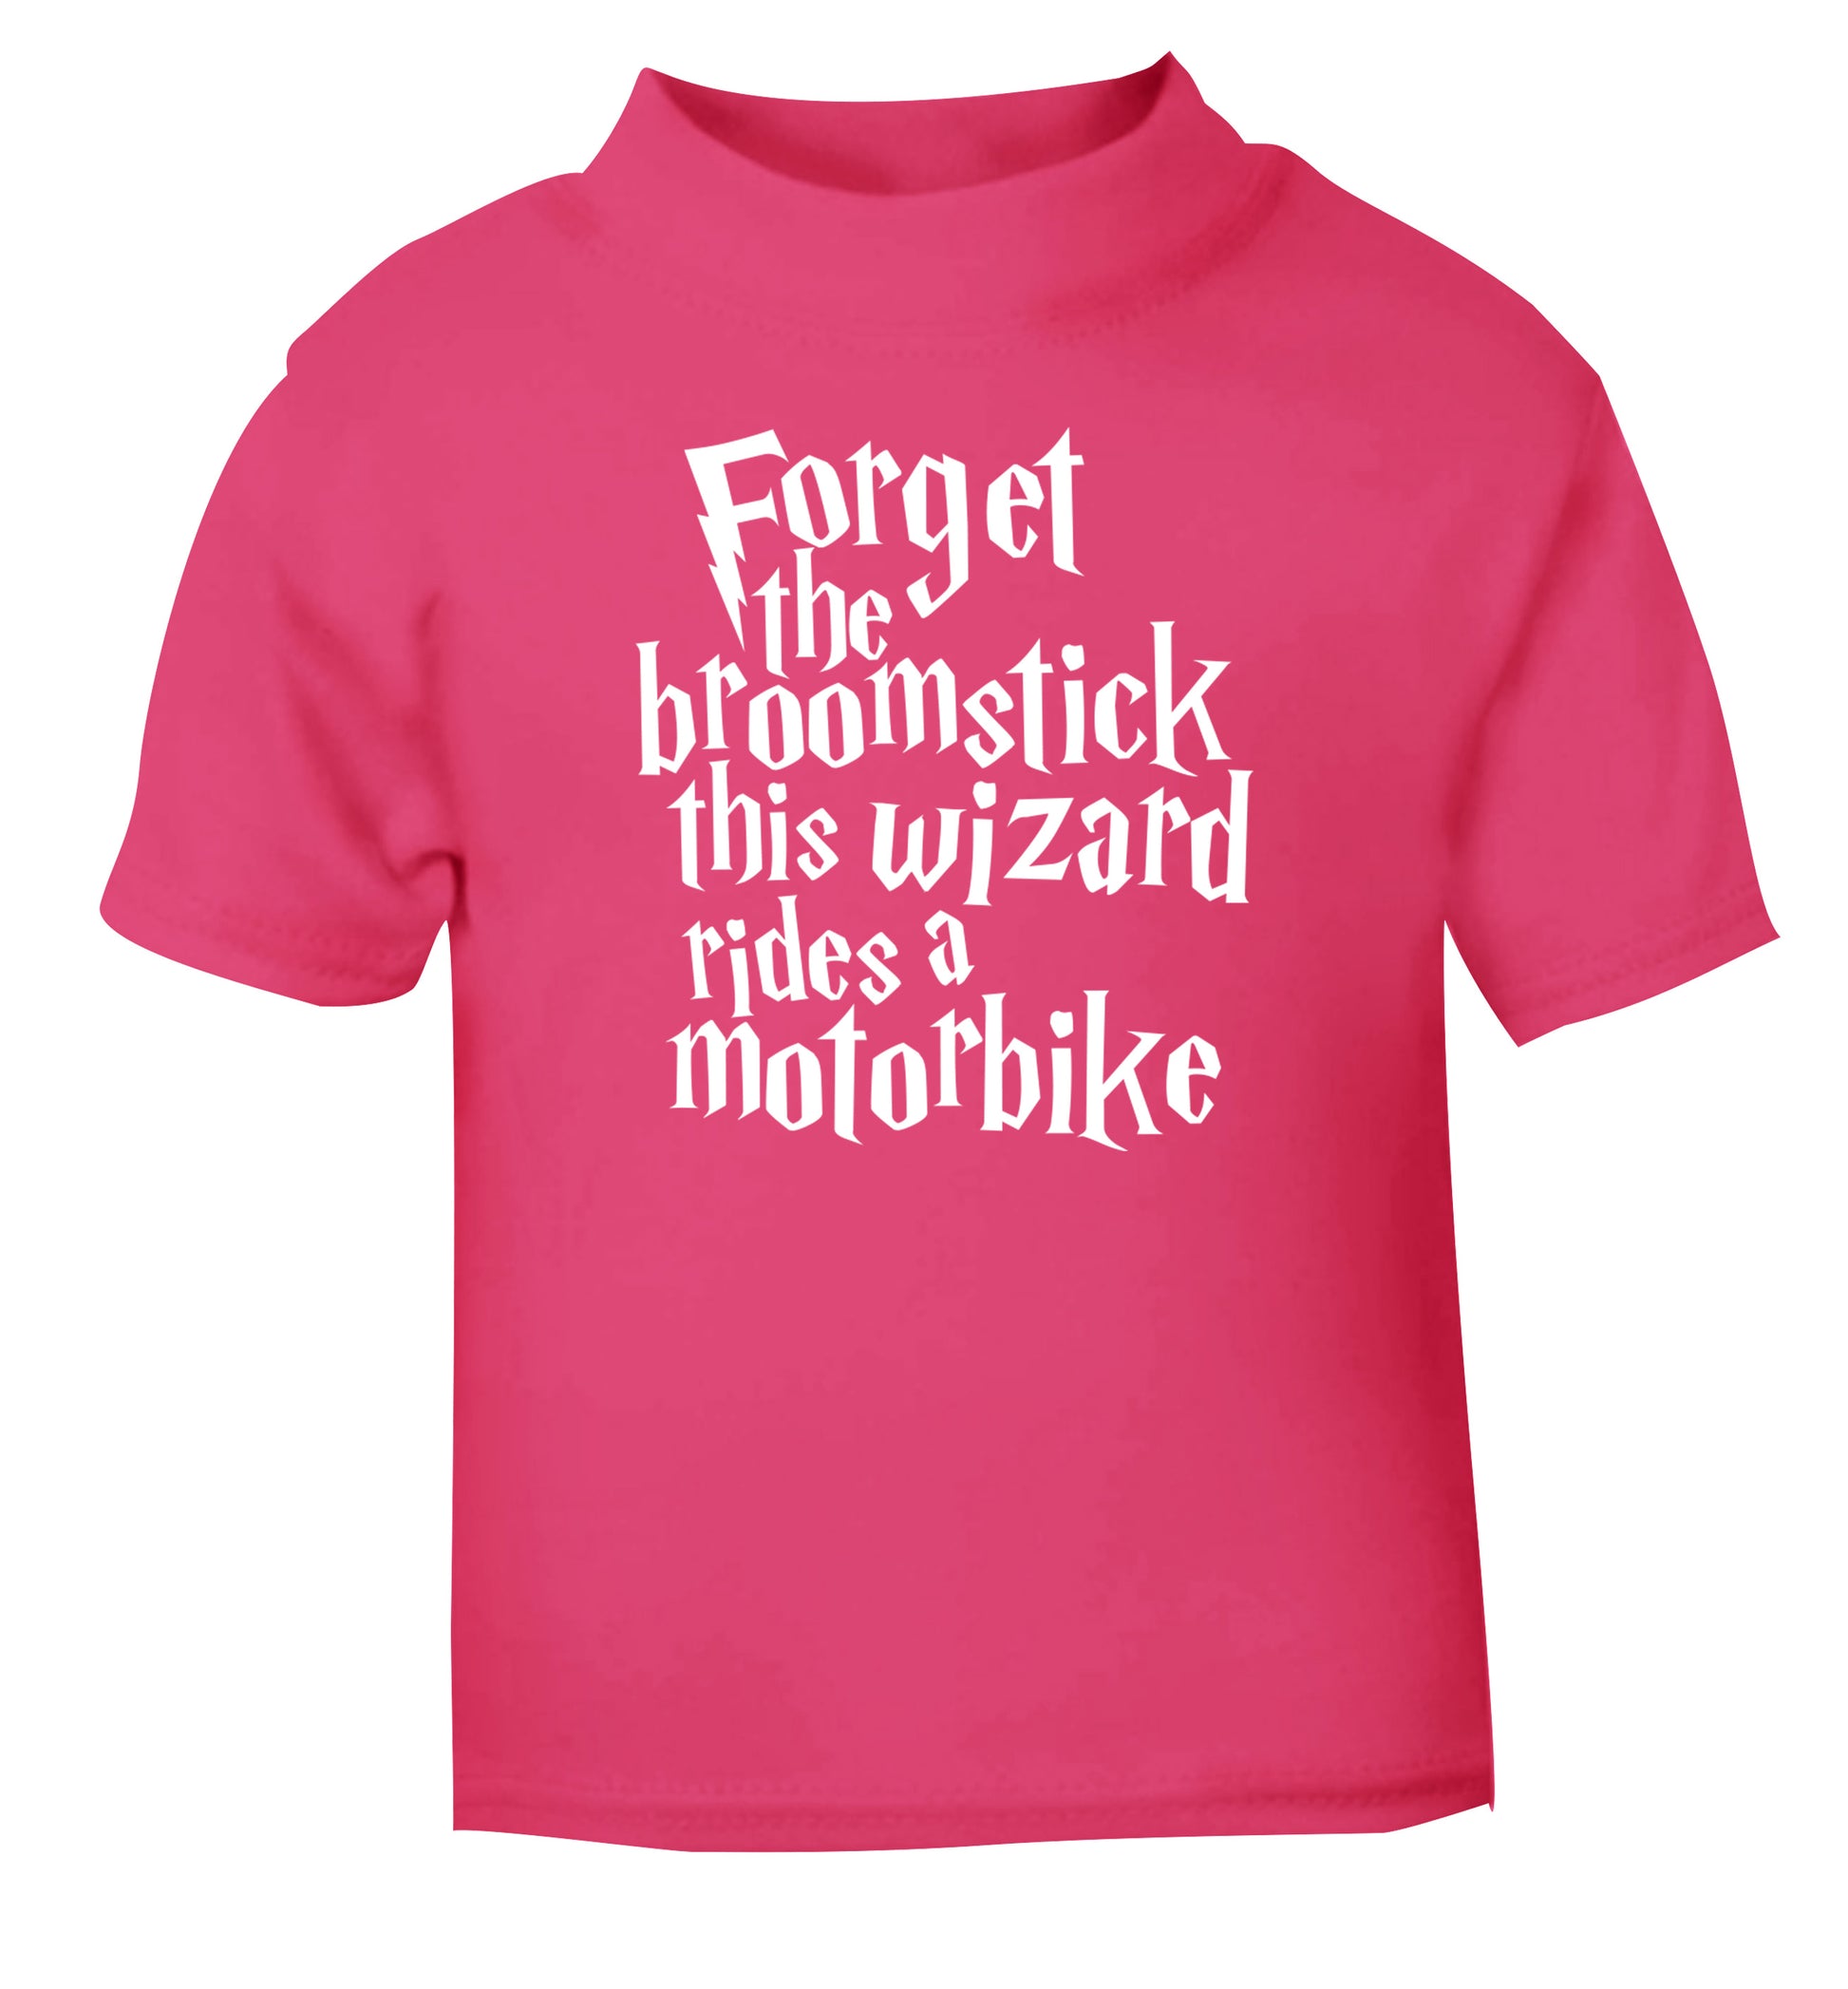 Forget the broomstick this wizard rides a motorbike pink Baby Toddler Tshirt 2 Years